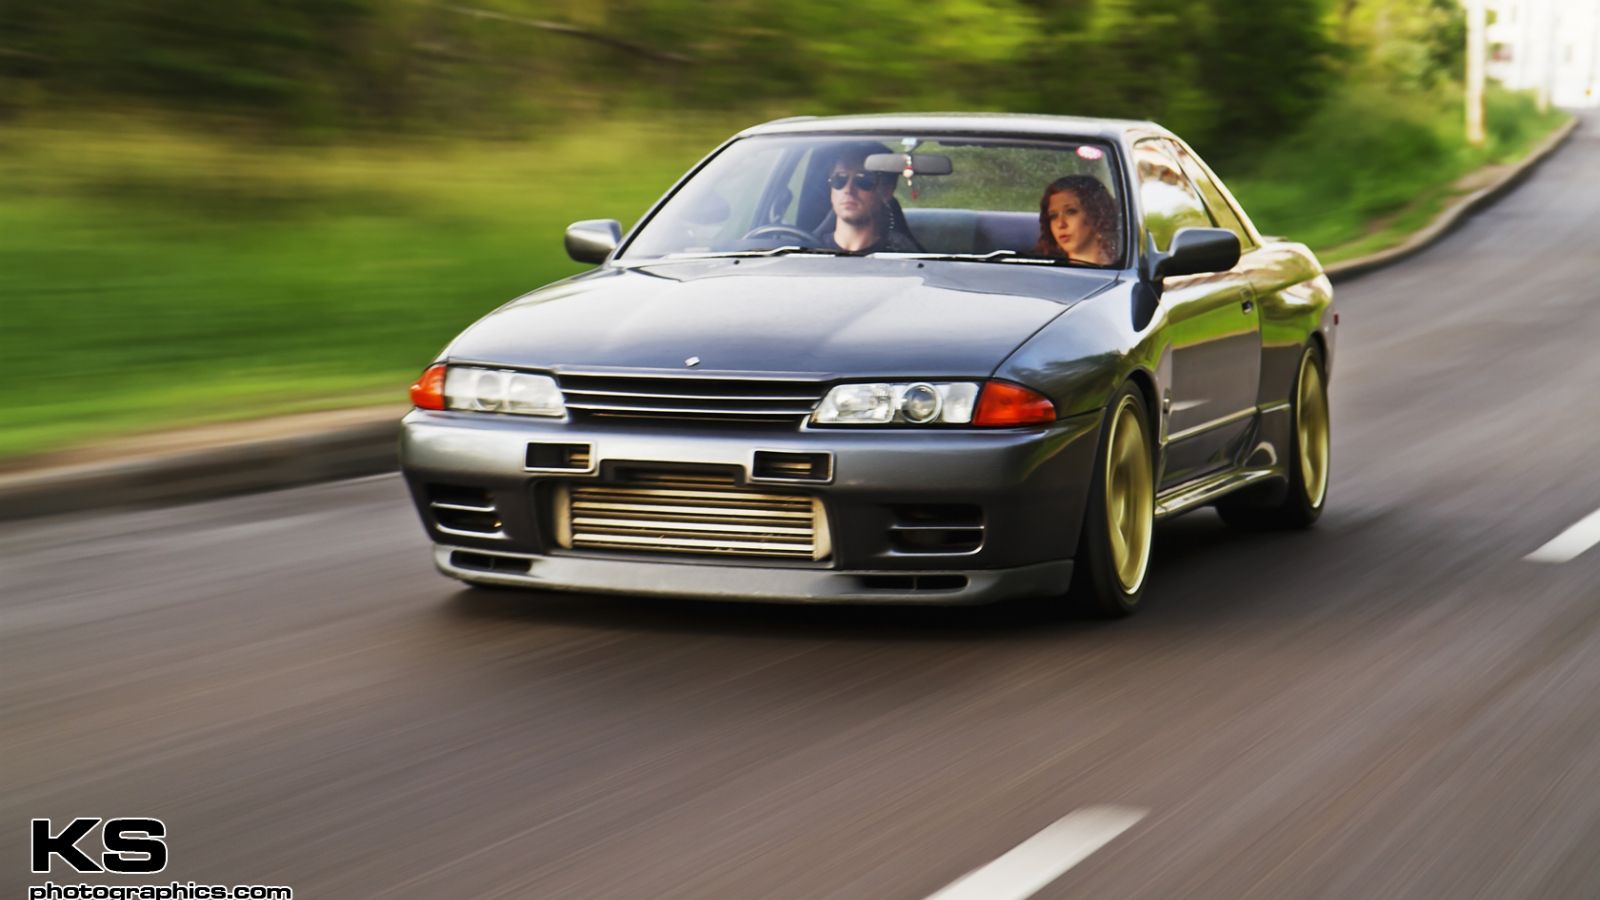 R32 Skyline Wallpapers Wallpaper Cave